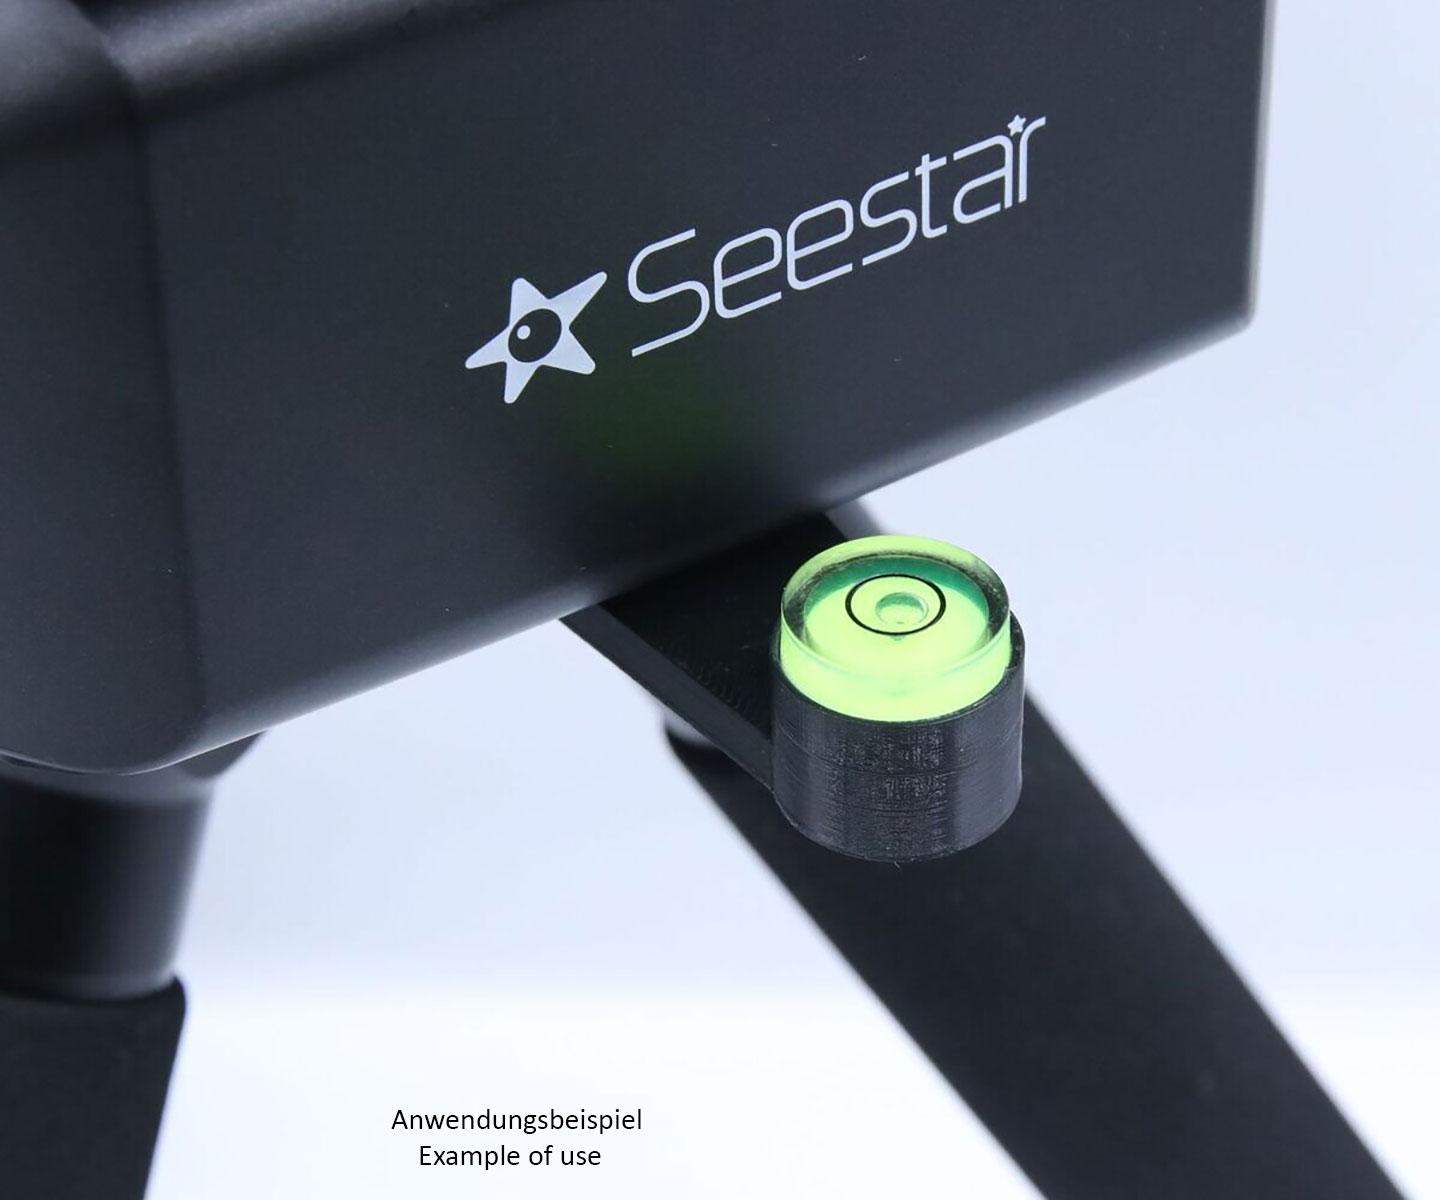  You can use this spirit level to level the tripod of the SeeStar S50 while the telescope is attached. [EN] 